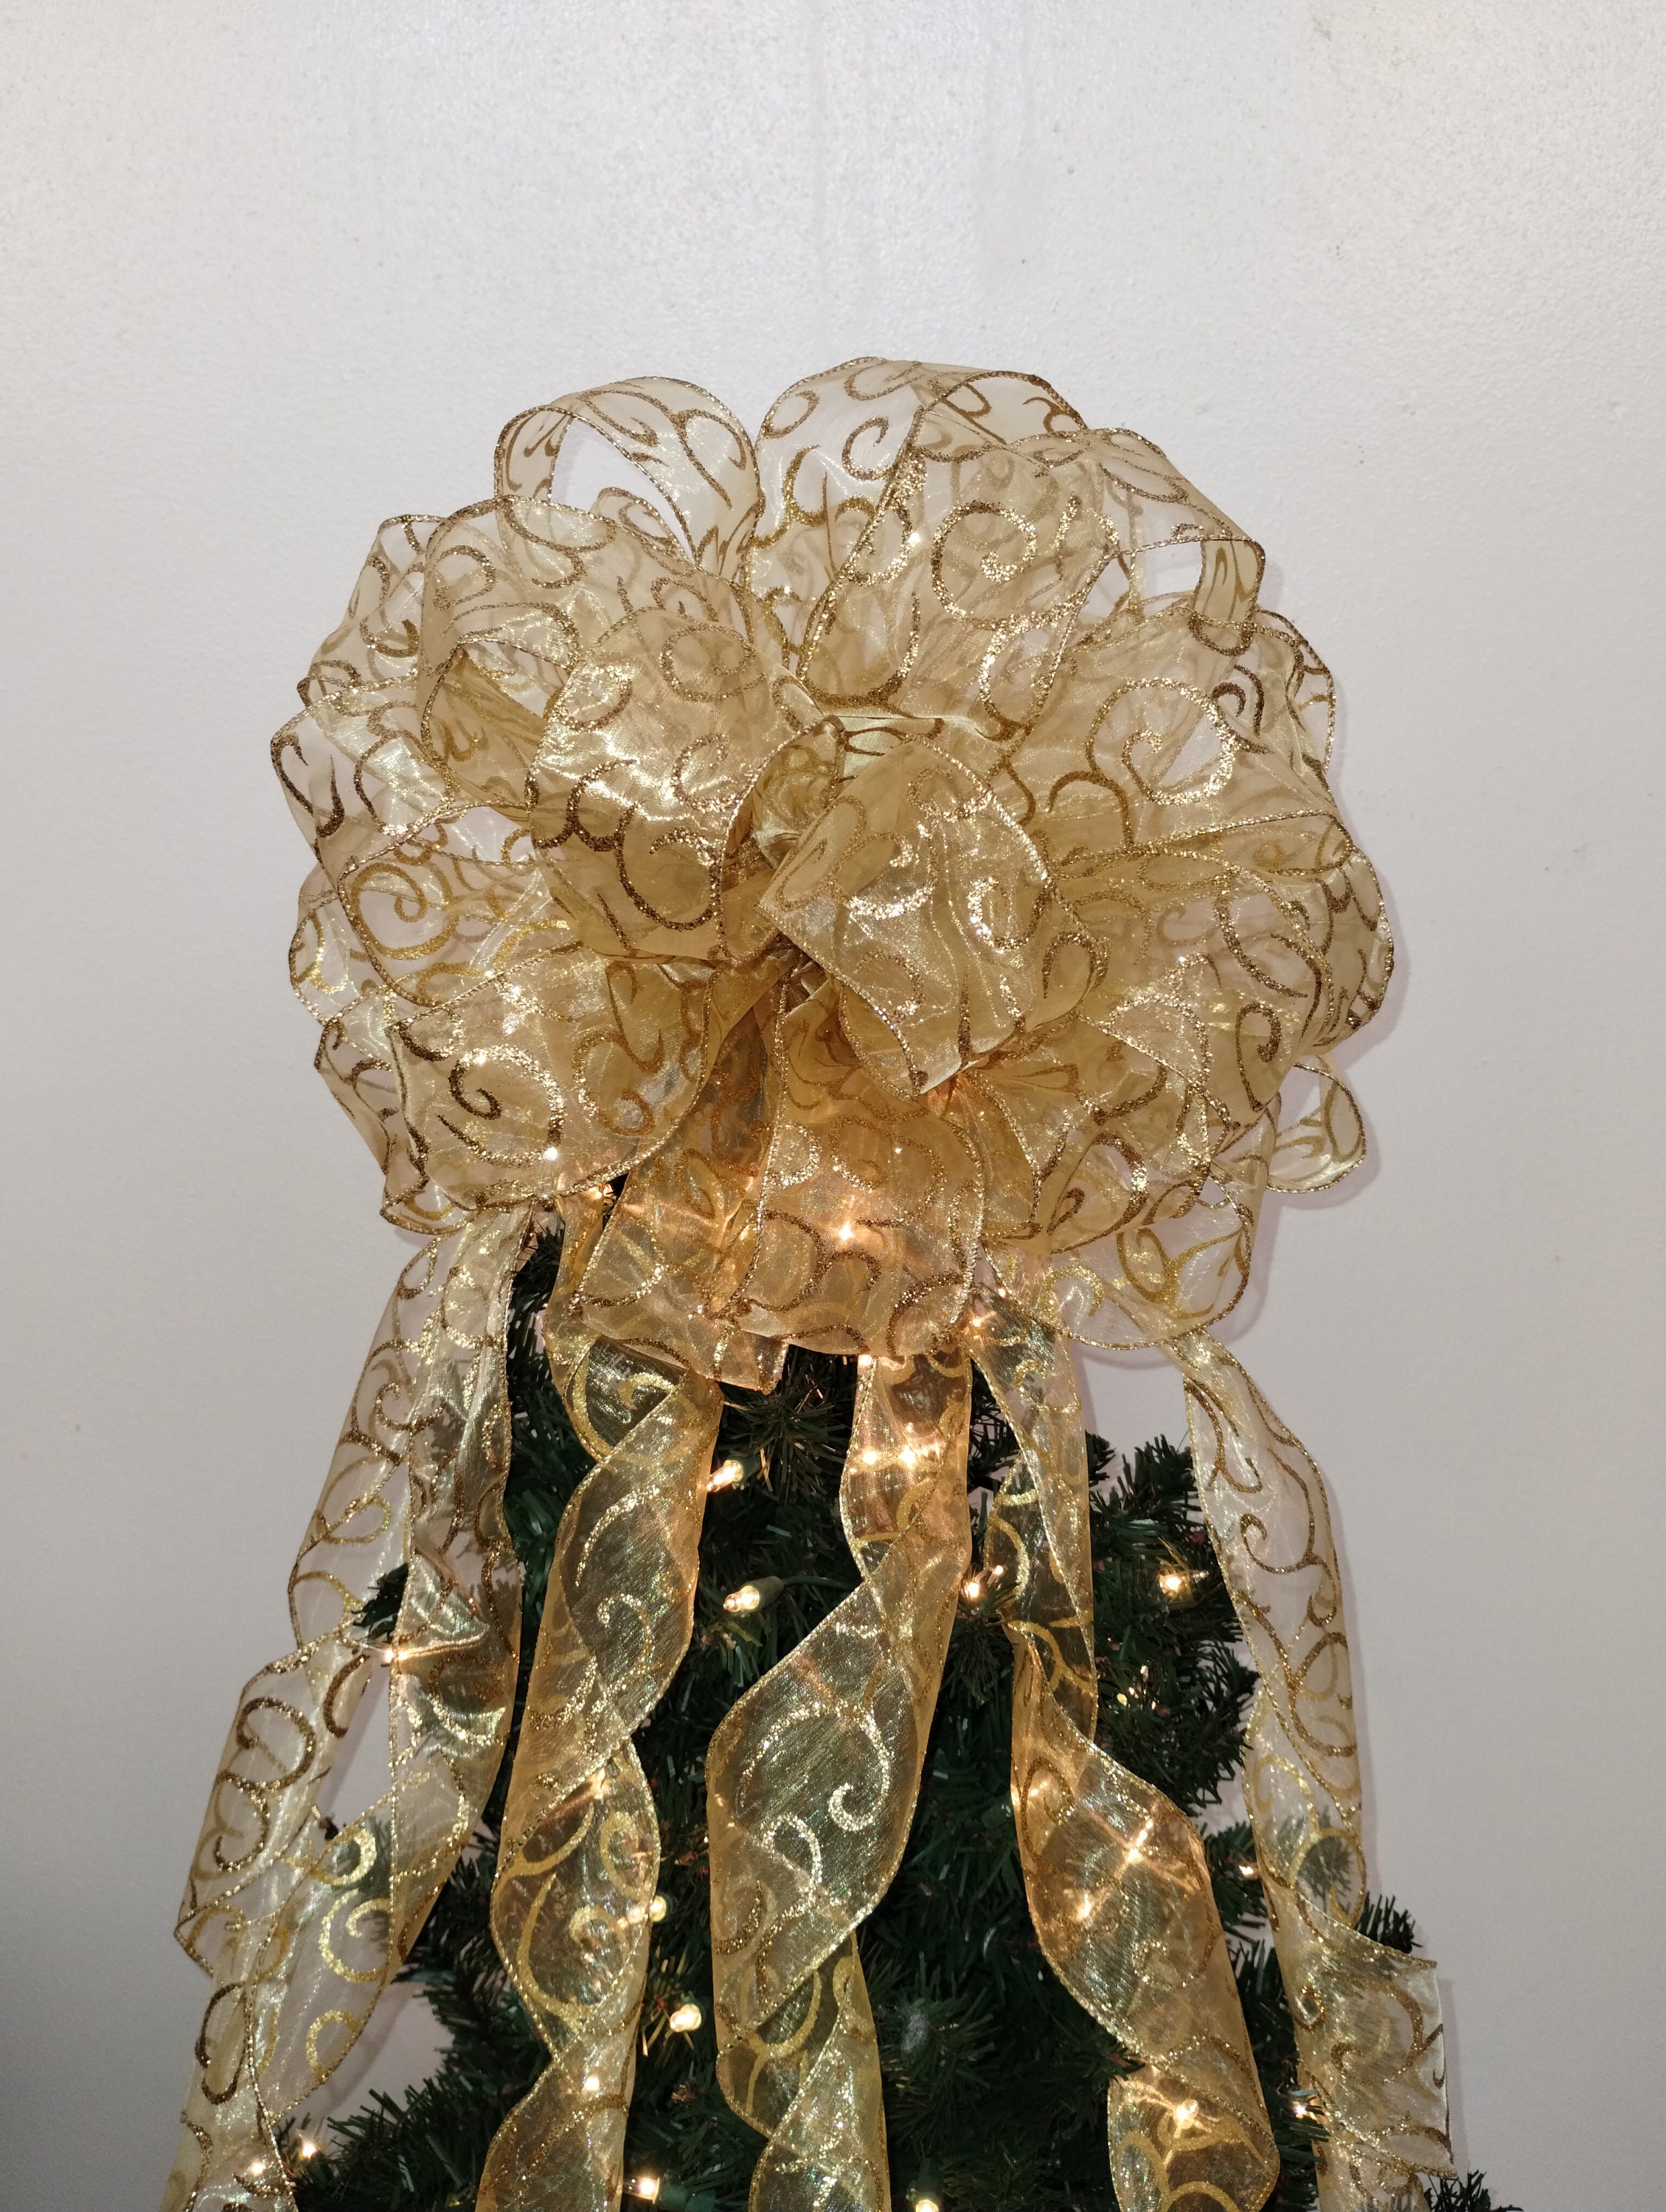 Gold Bows, Extra Large Bow, Christmas Tree Topper, Car Bow